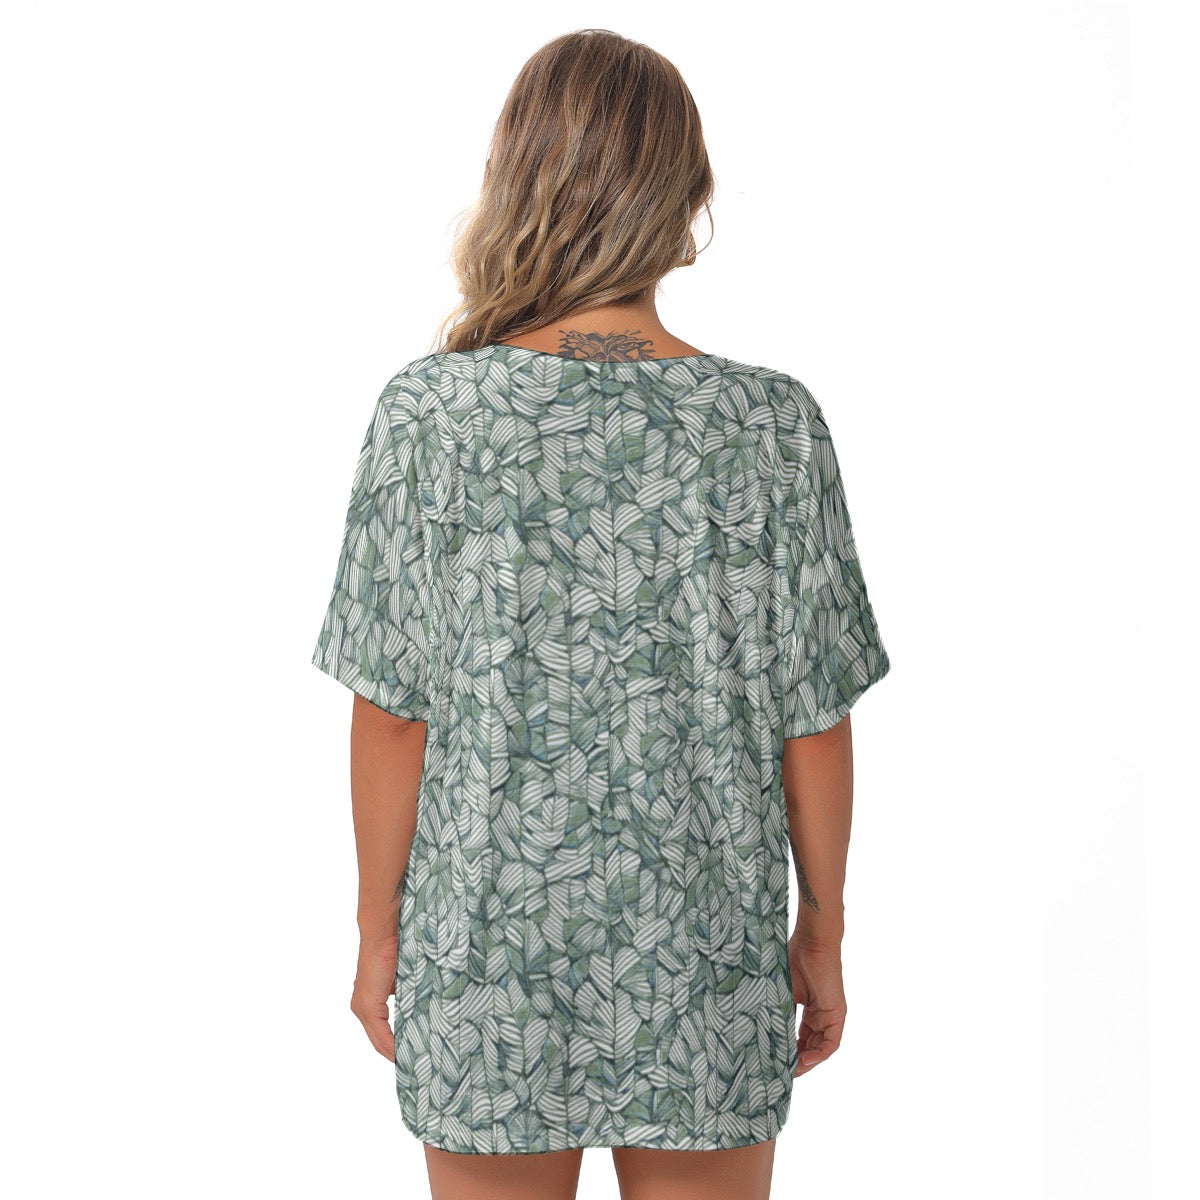 Water Lily -- Women's Bat Sleeves V-Neck Blouse